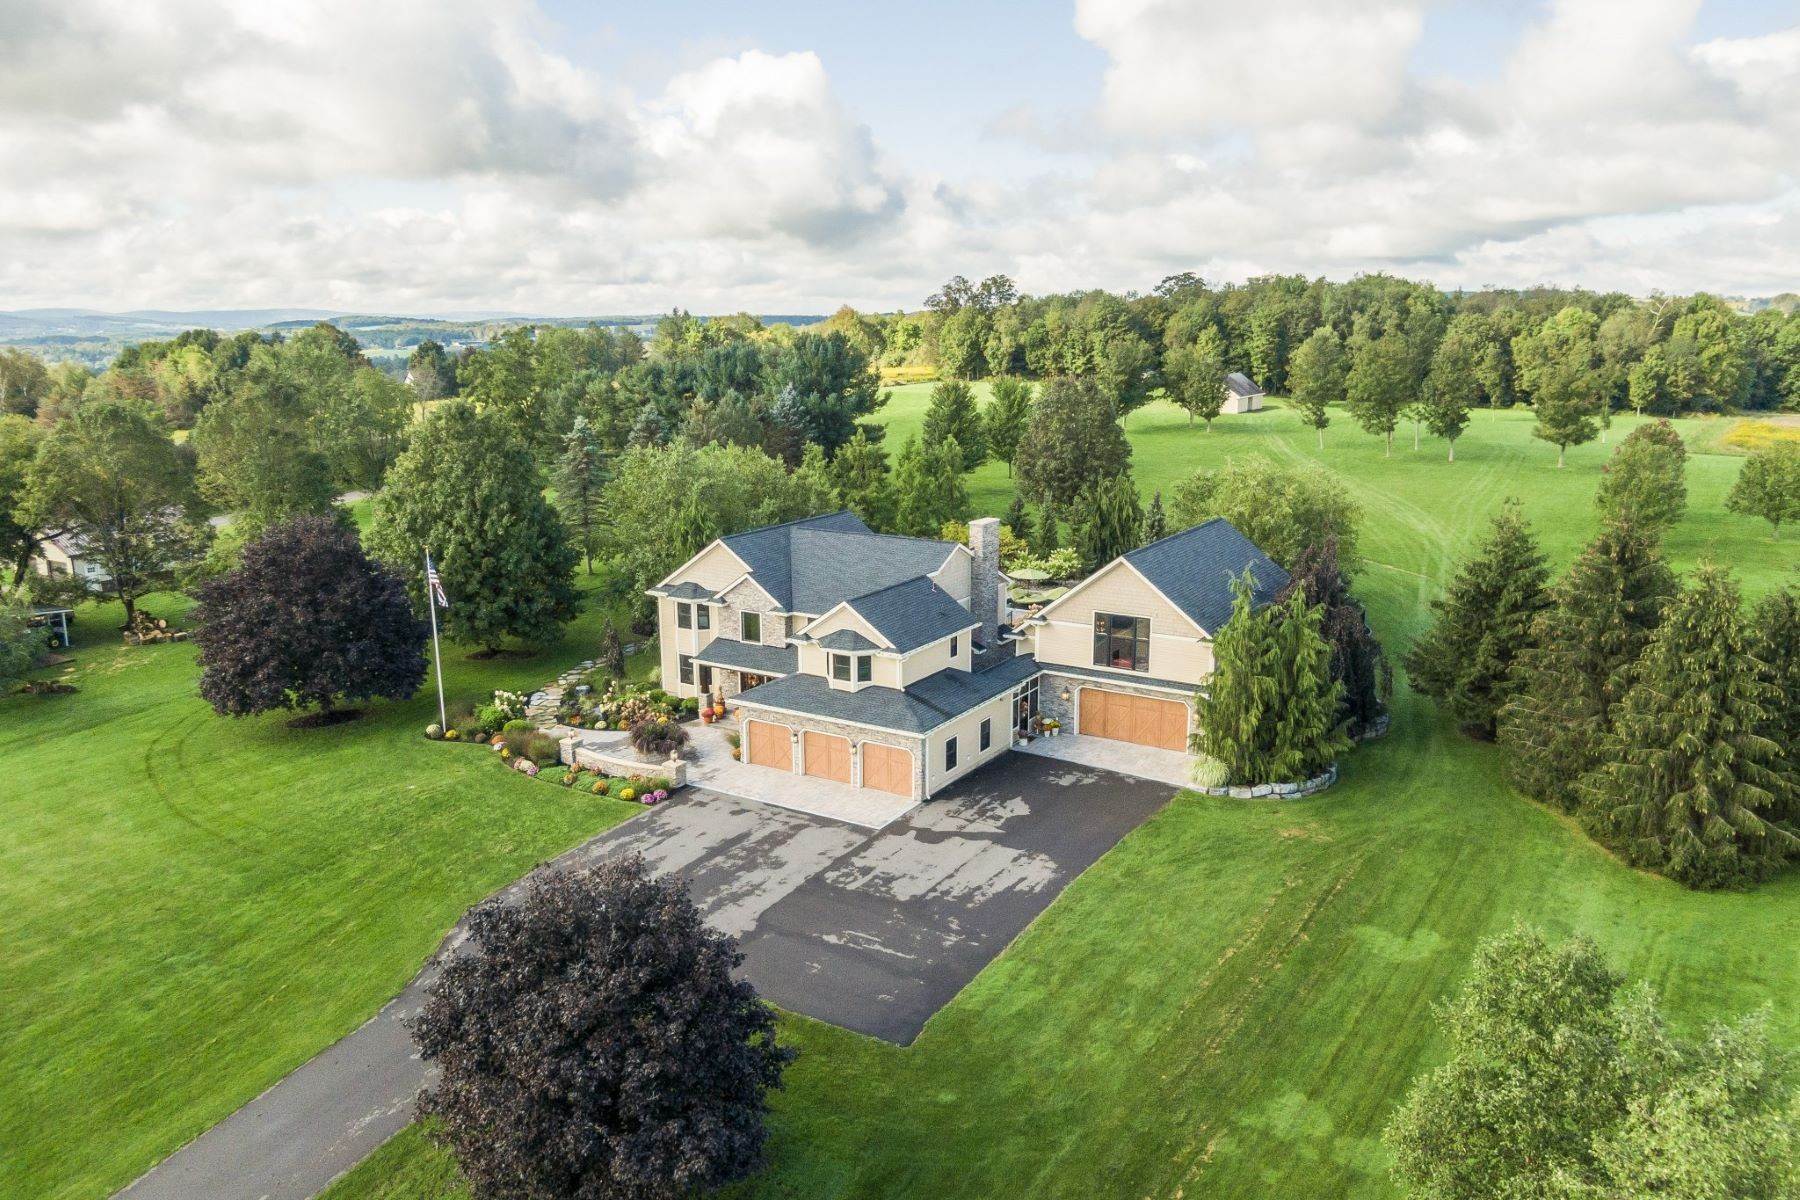 Single Family Homes for Sale at Magnificent Property is a Private Oasis 4545 Cosmos Hill Road Cortland, New York 13045 United States